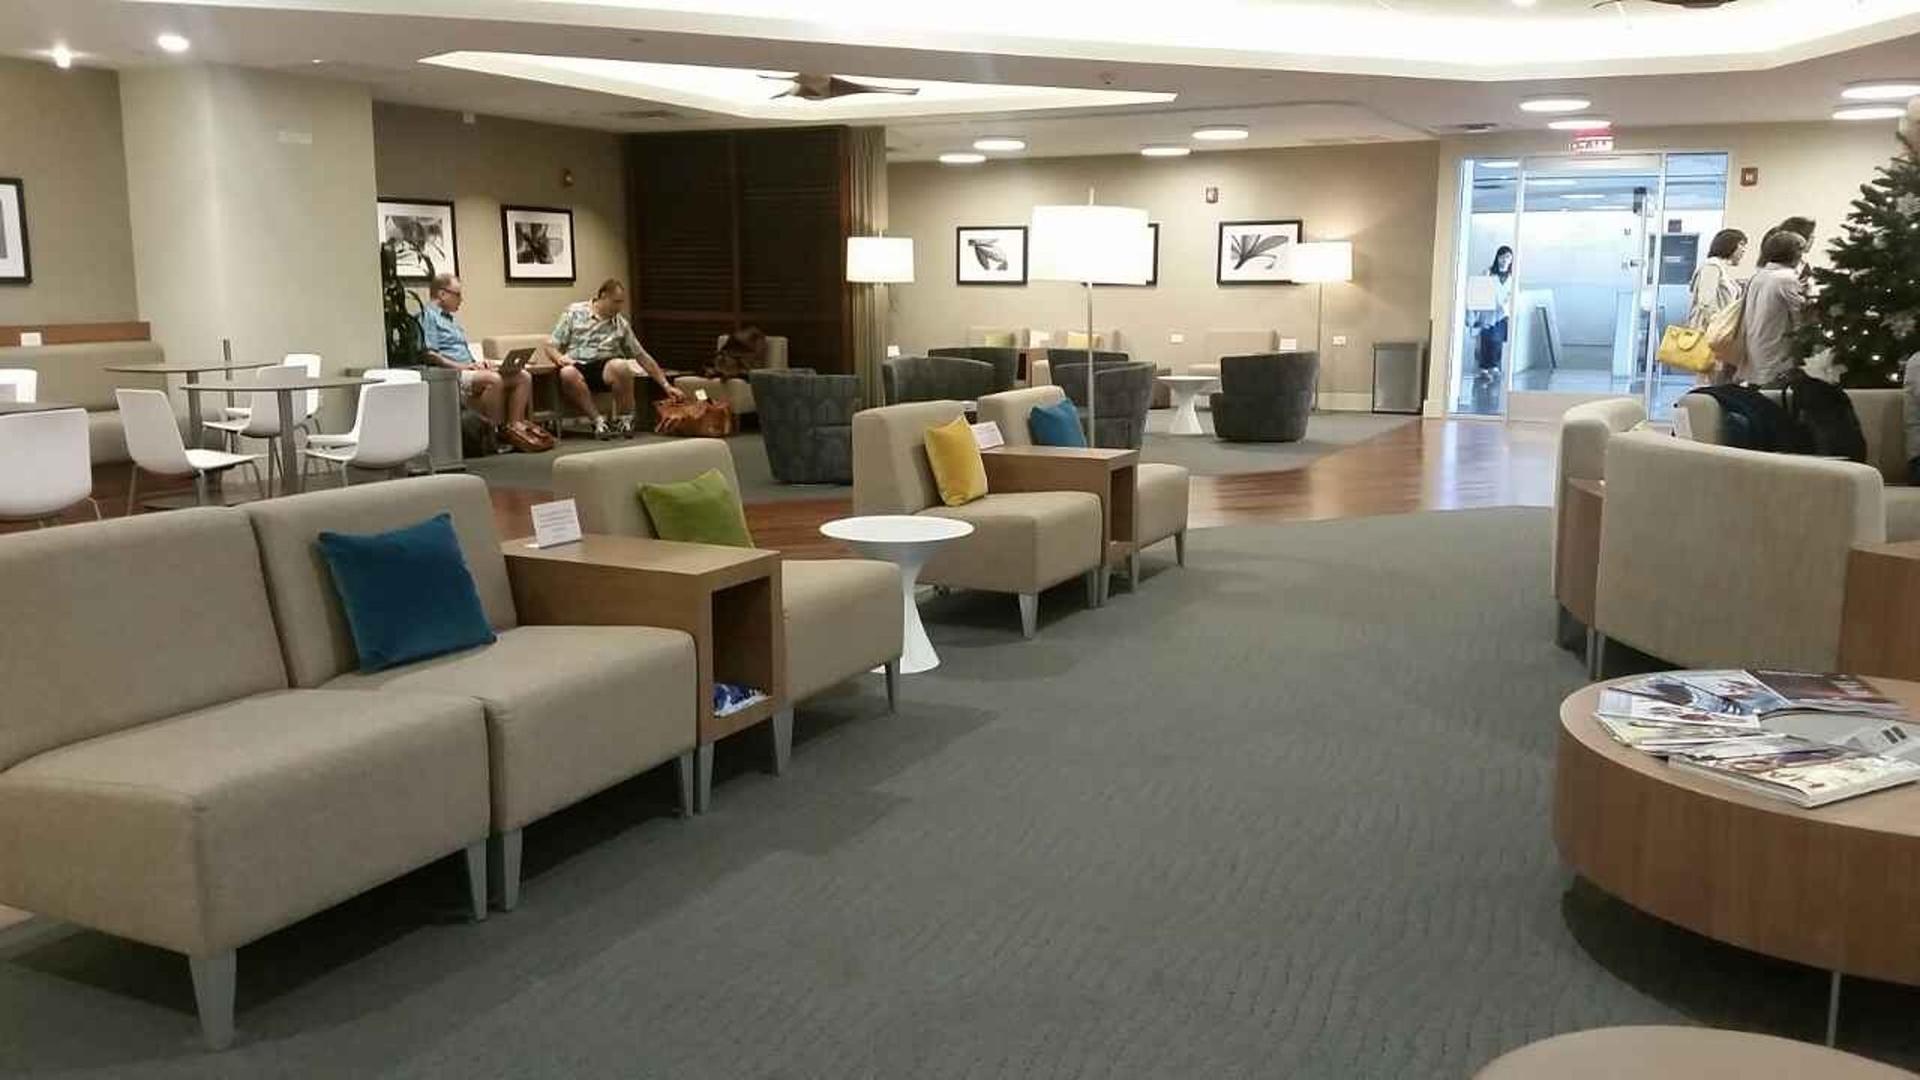 Hawaiian Airlines The Plumeria Lounge image 4 of 41